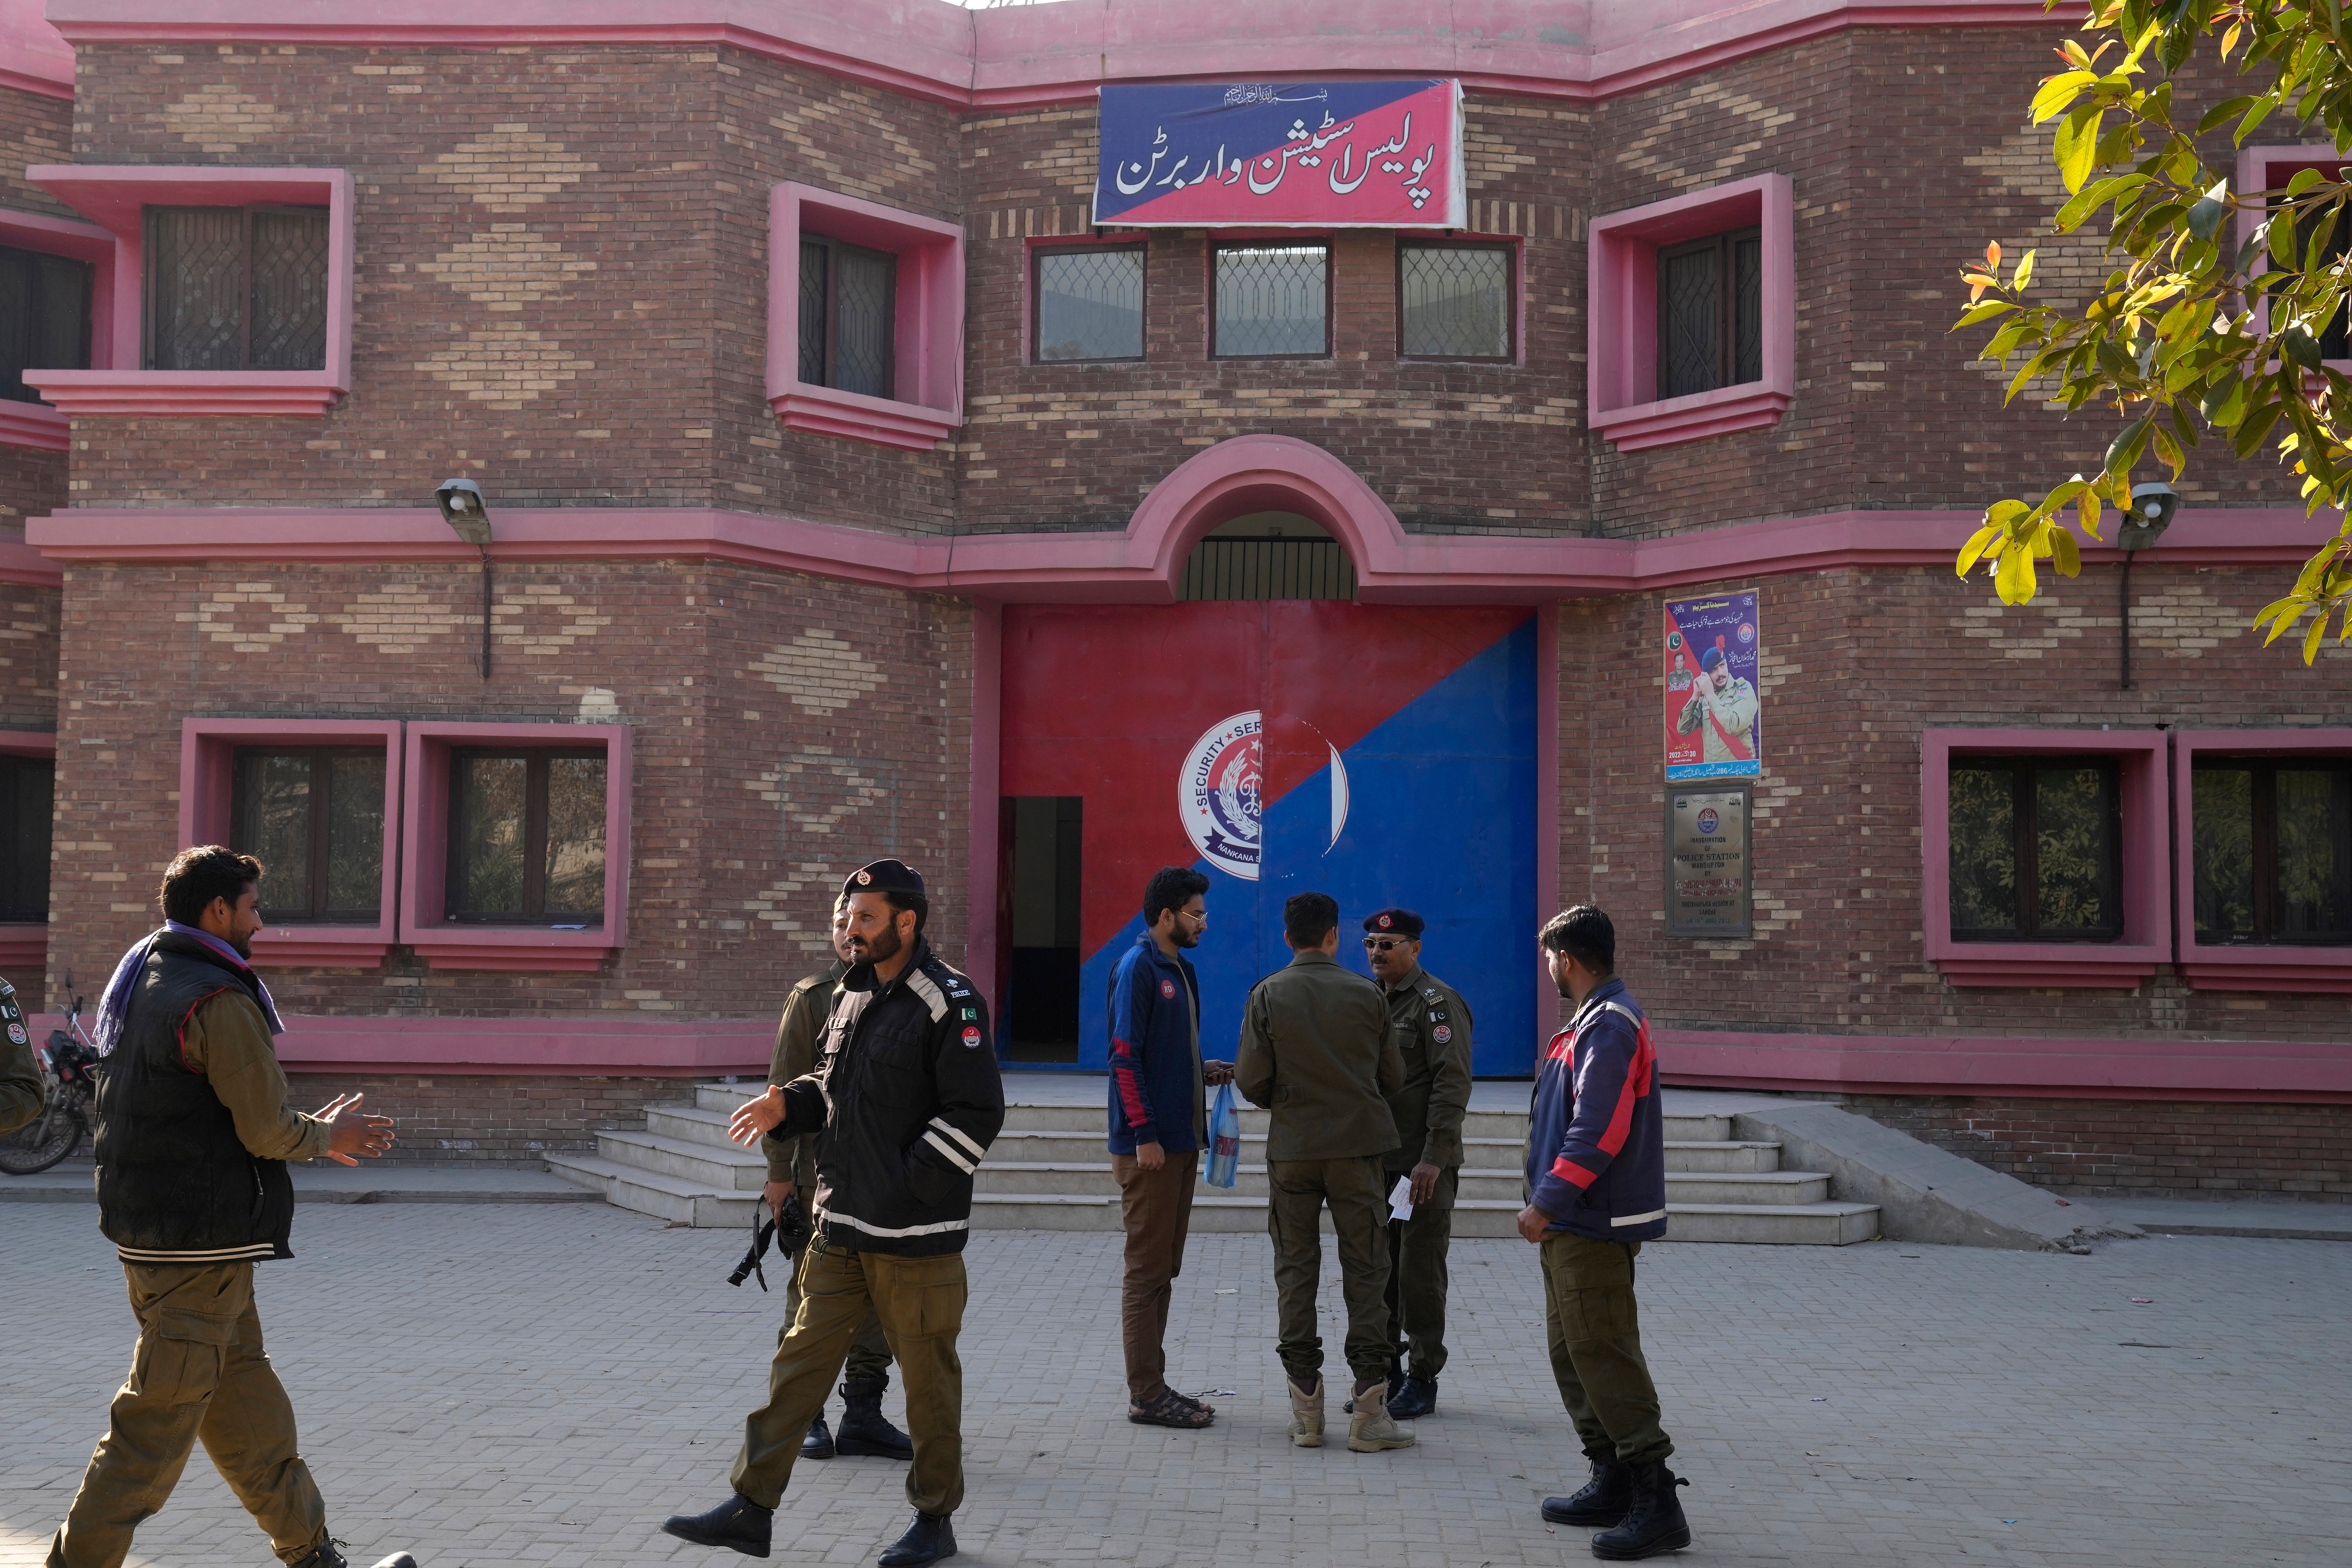 Police officers gather outside a police station in Warburton, an area of district Nankana, on Sunday